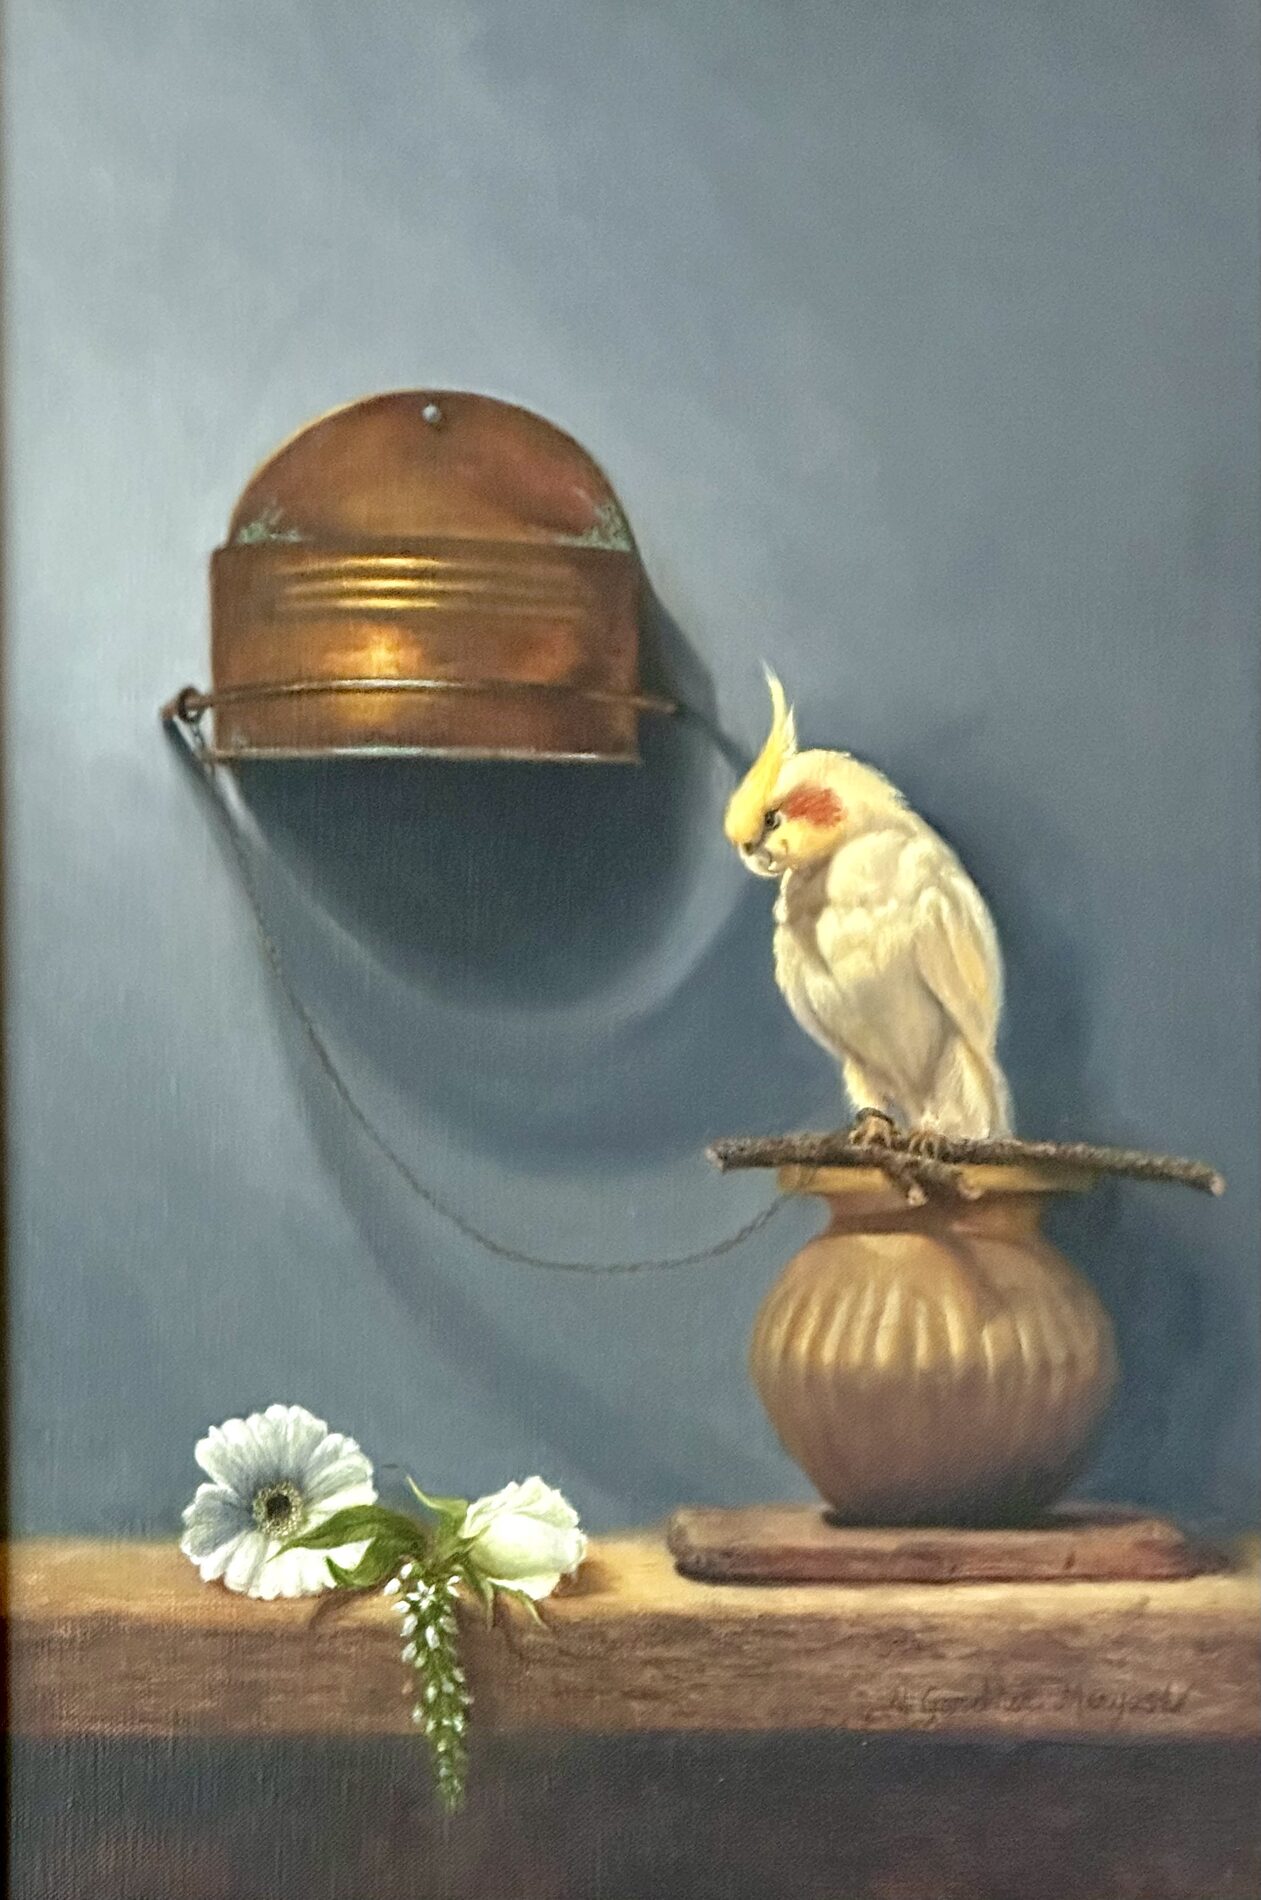 A yellow cockatiel perched on sticks on a vase with white flowers next to it on the wooden shelf.